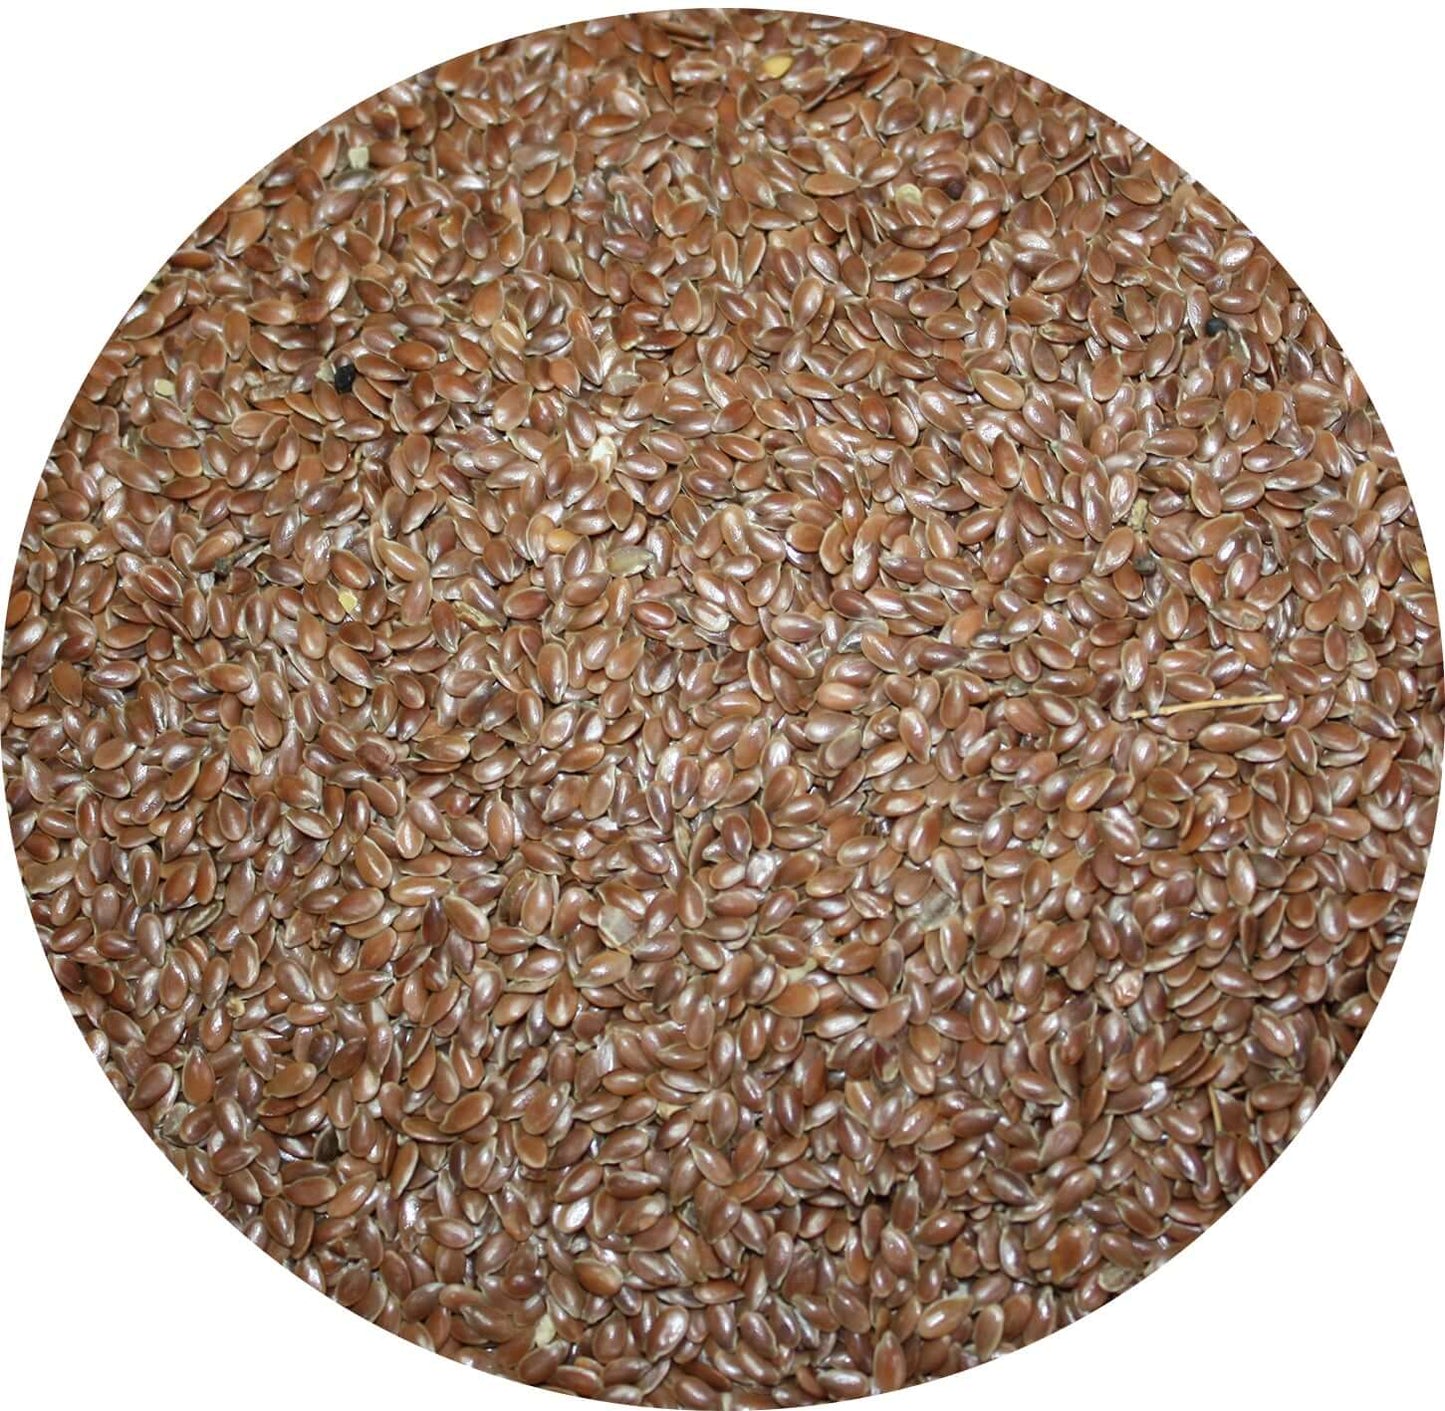 Linseed for fishing has an irresistible scent  that will capture the carps attention. 